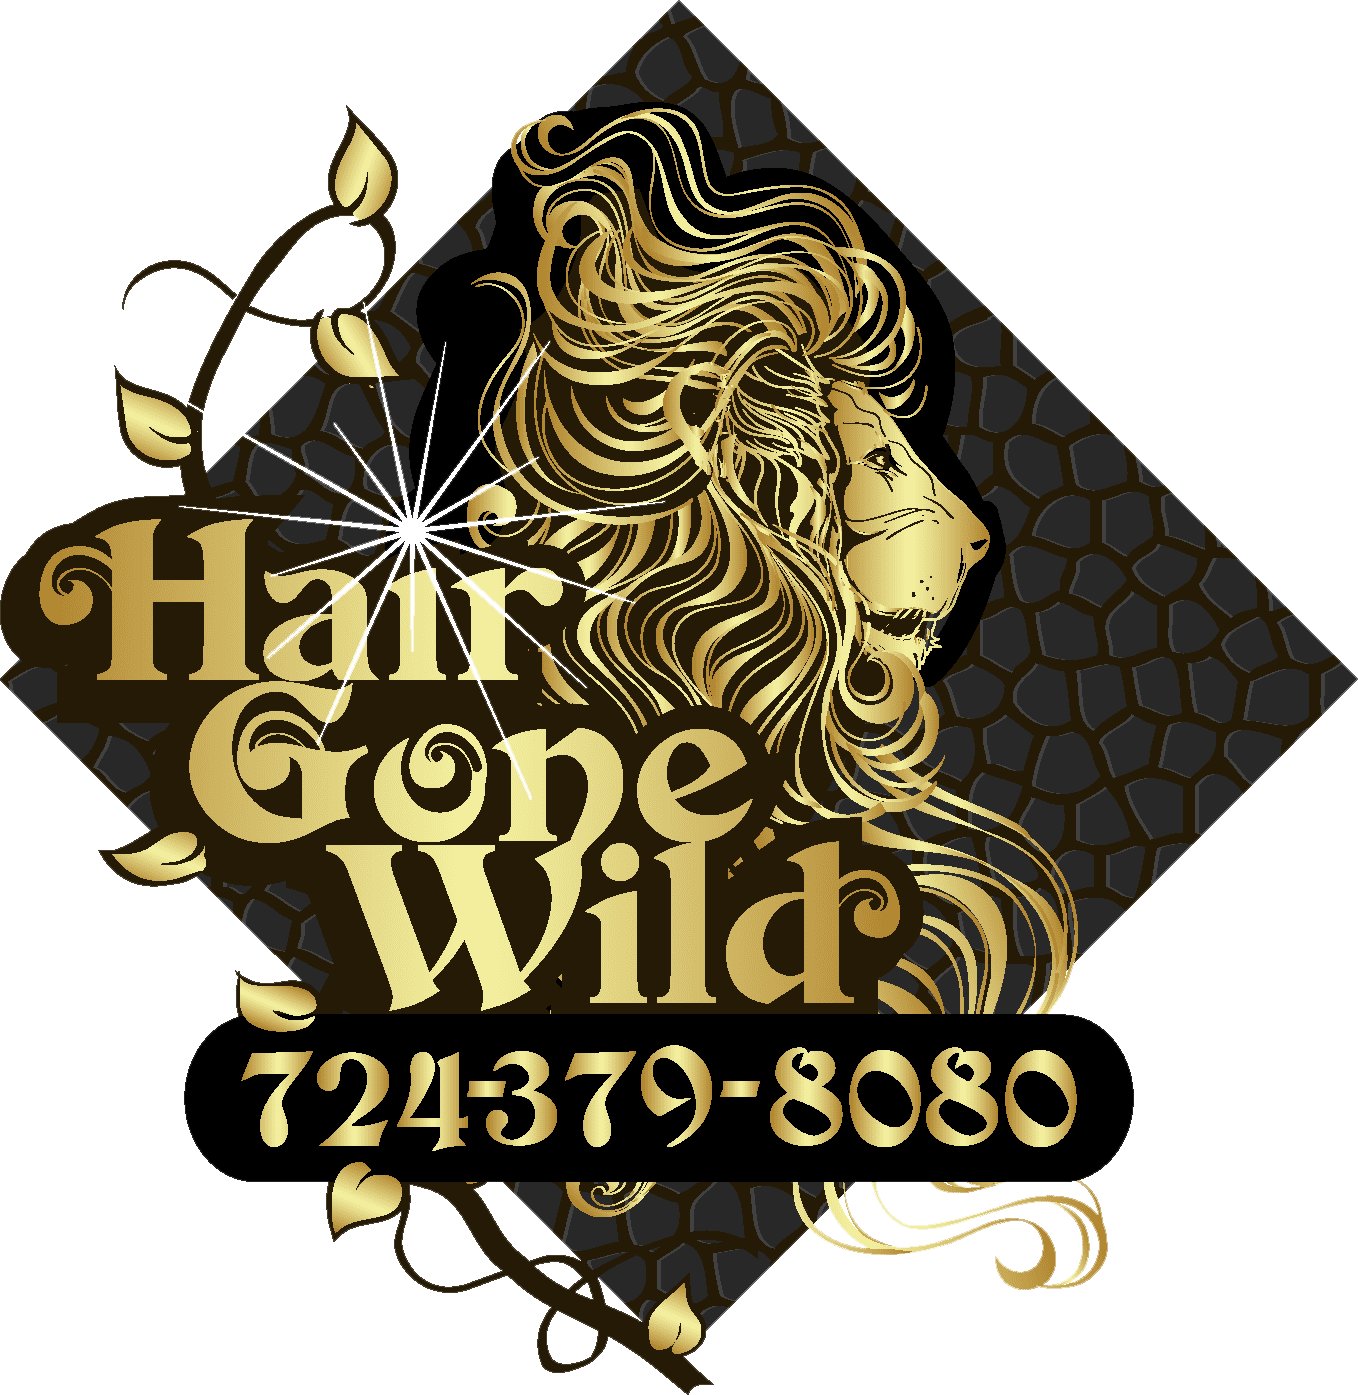 Hair Gone Wild 4965 State Route 51 N Belle Vernon Pa 15012